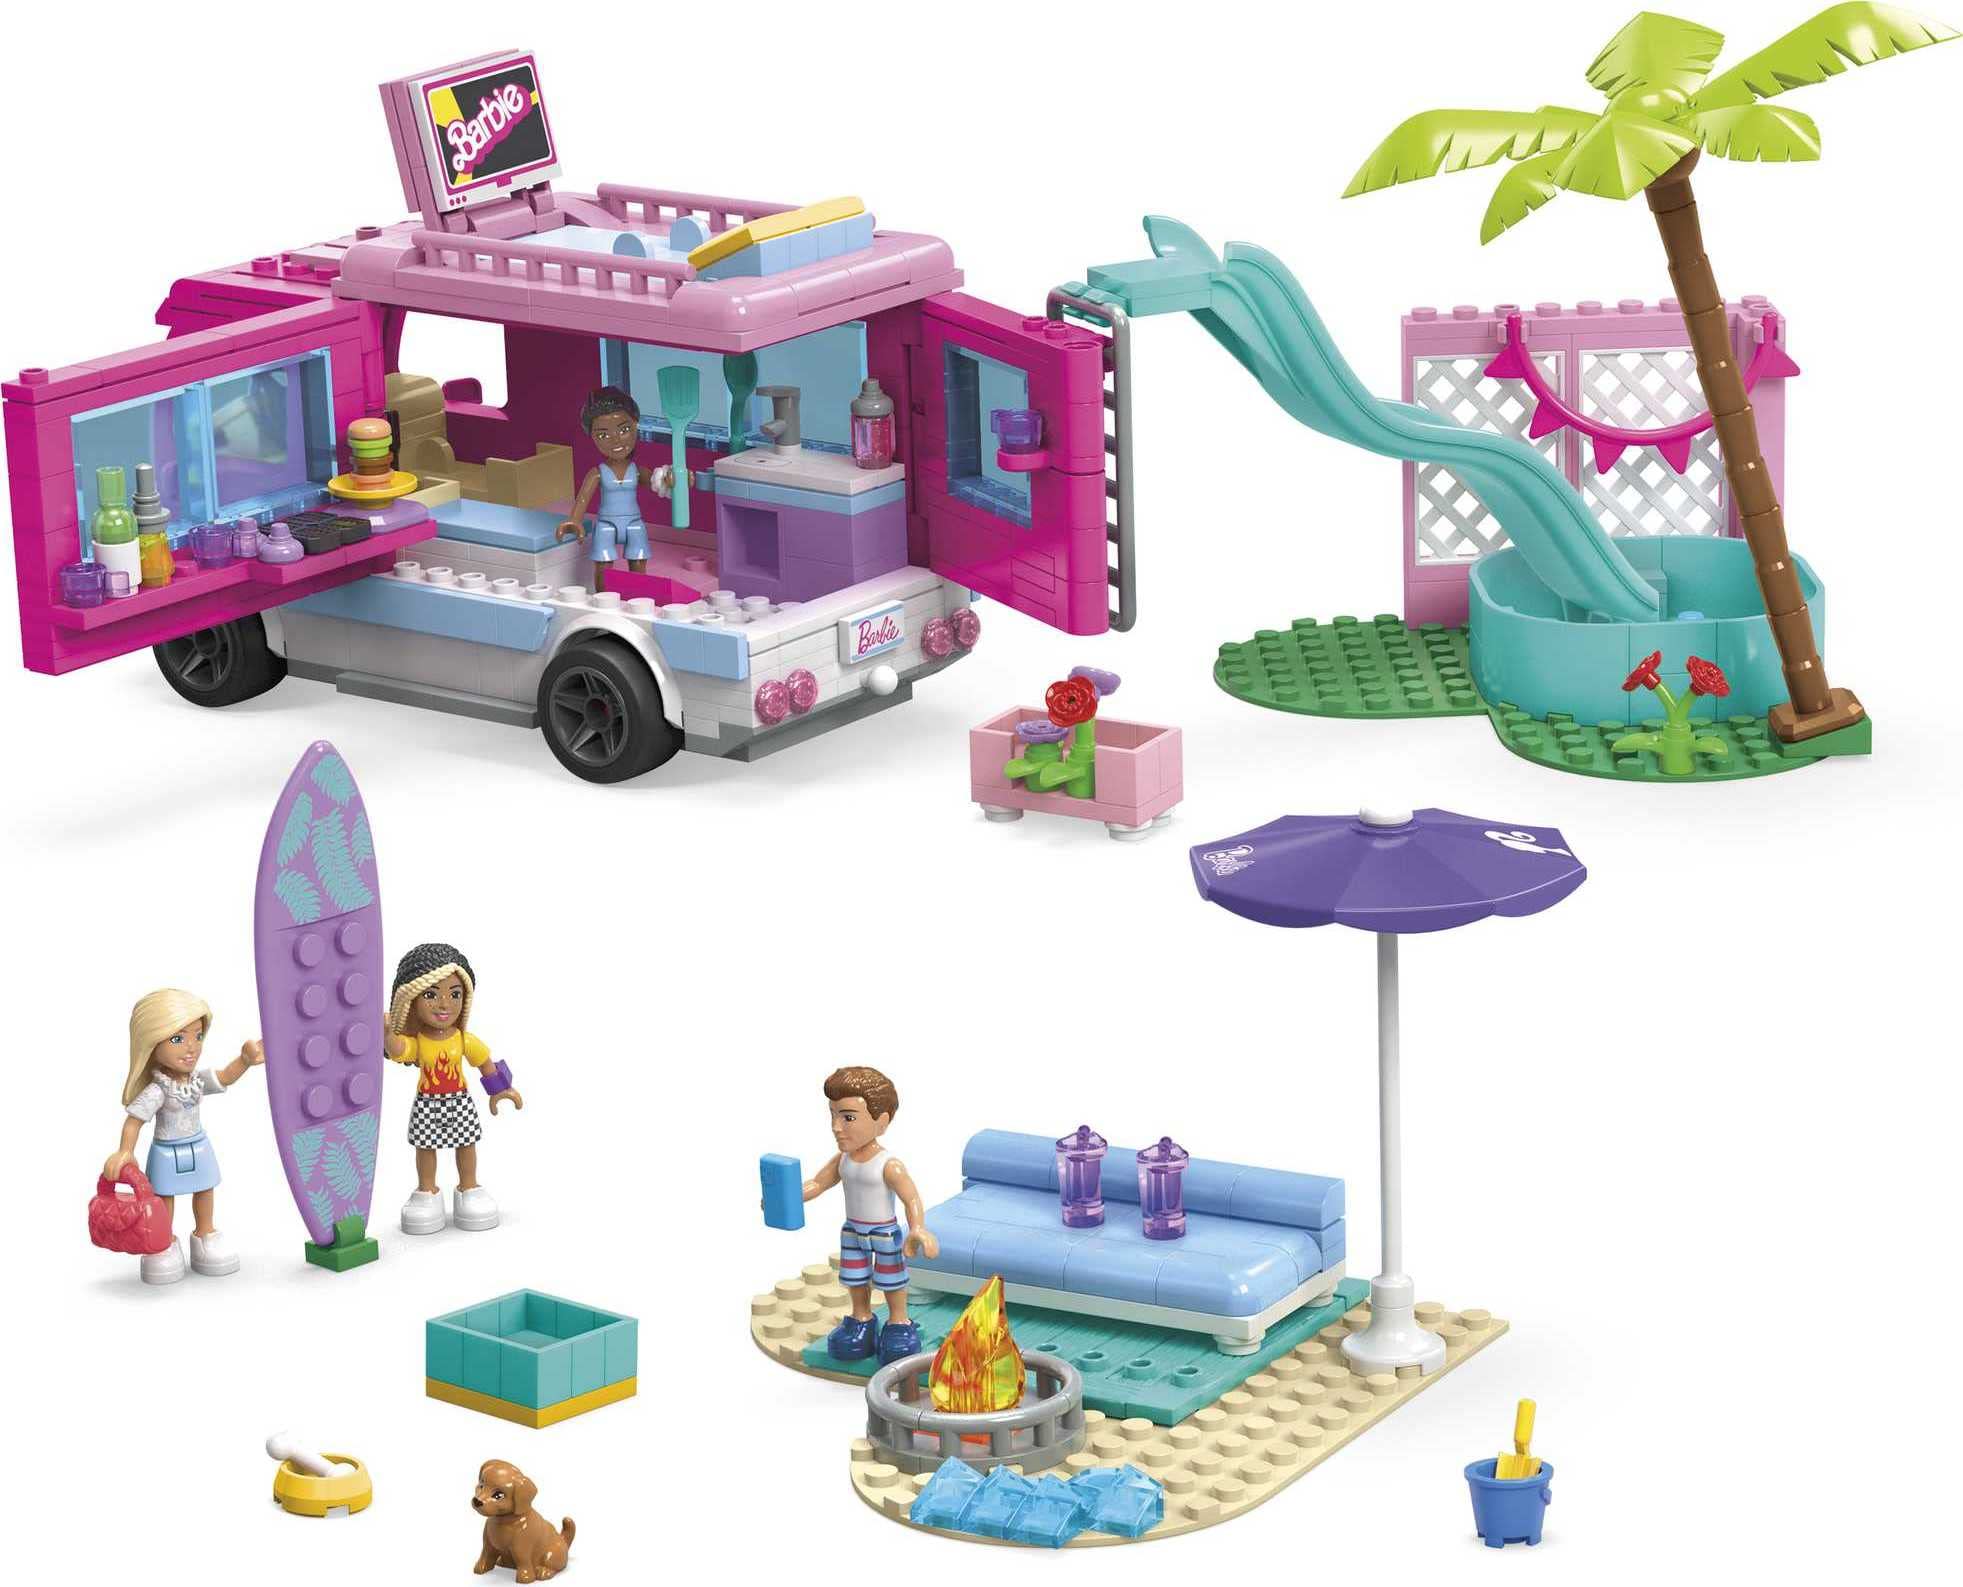 MEGA Barbie Car Building Toys Playset, Dream Camper Adventure With 580 Pieces, 4 Micro-Dolls and Accessories, Pink, For Kids Age 6+ Years